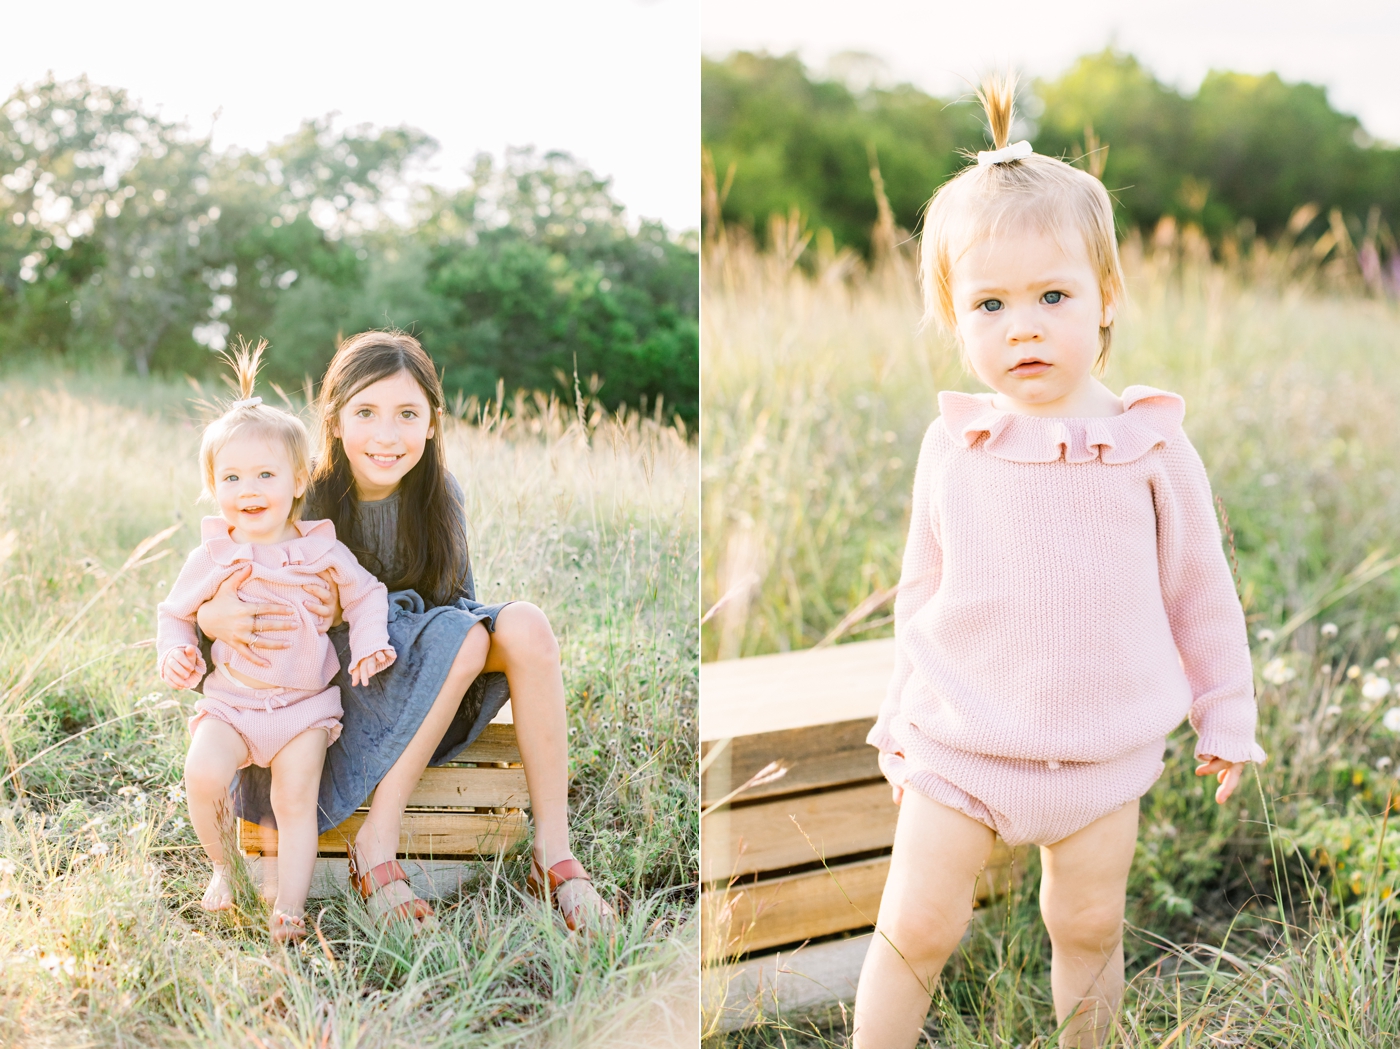 Sibling portraits in field of tall grass. Photo by Austin Texas family photographer, Sana Ahmed Photography.